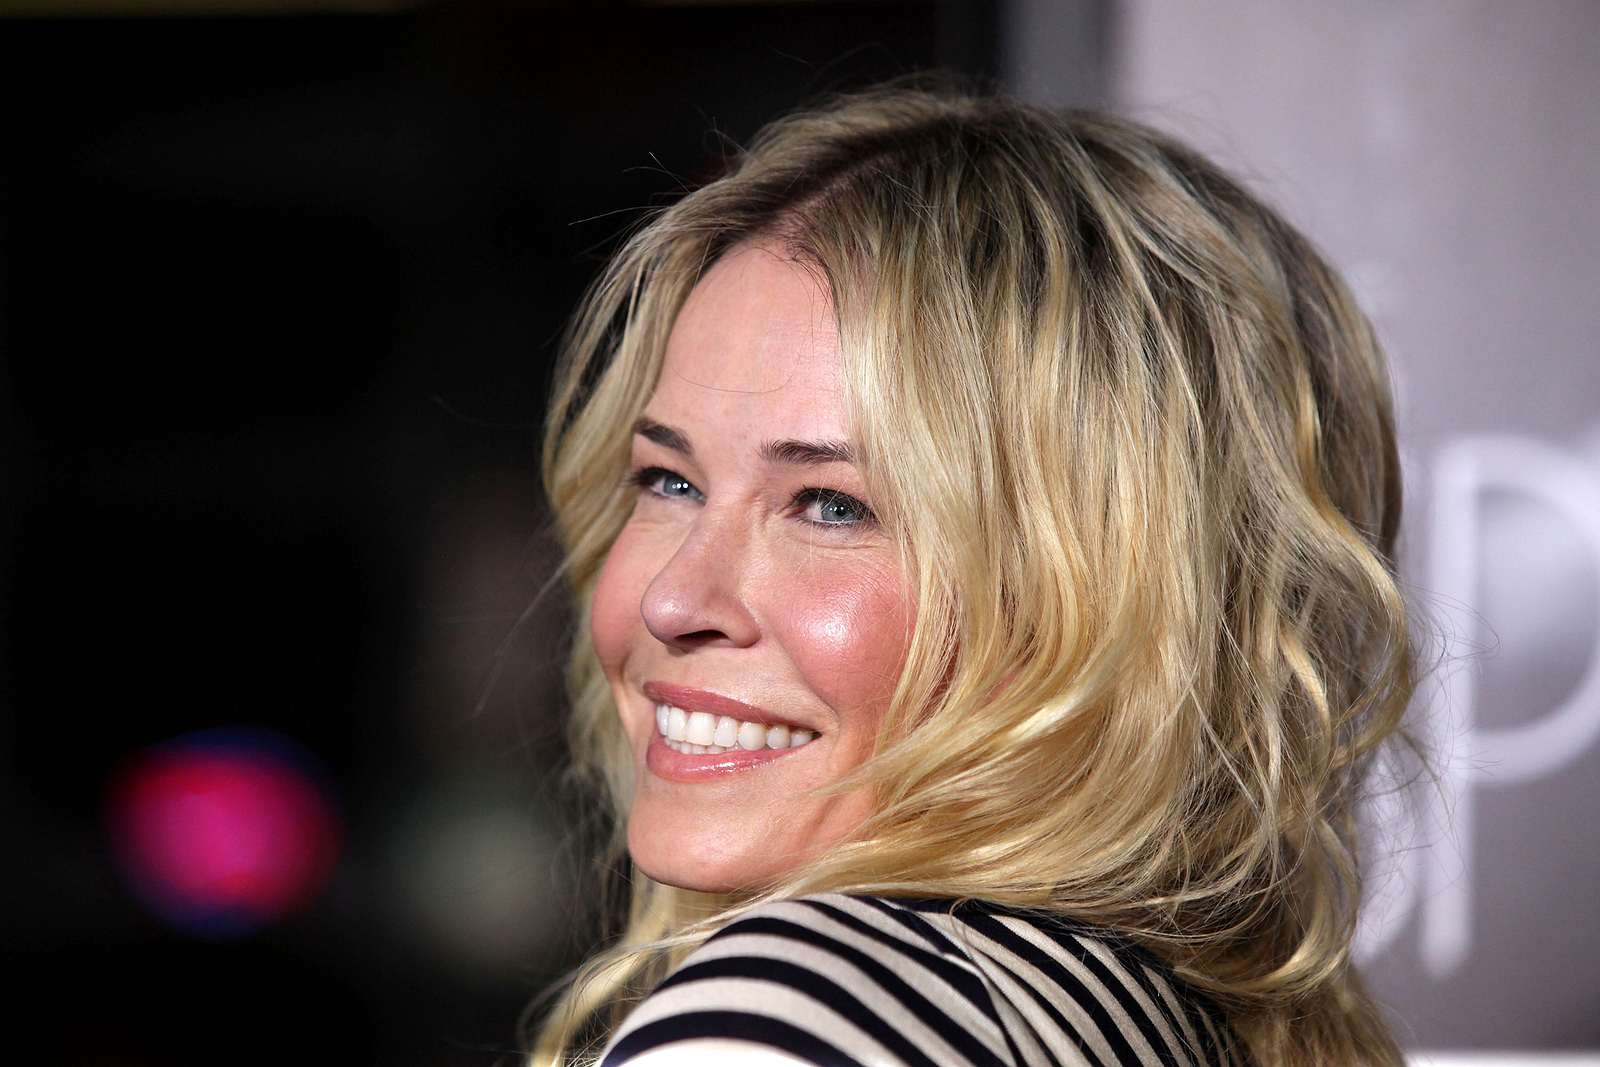 Thoughts on Chelsea Handler’s View on Freedom & Abortion